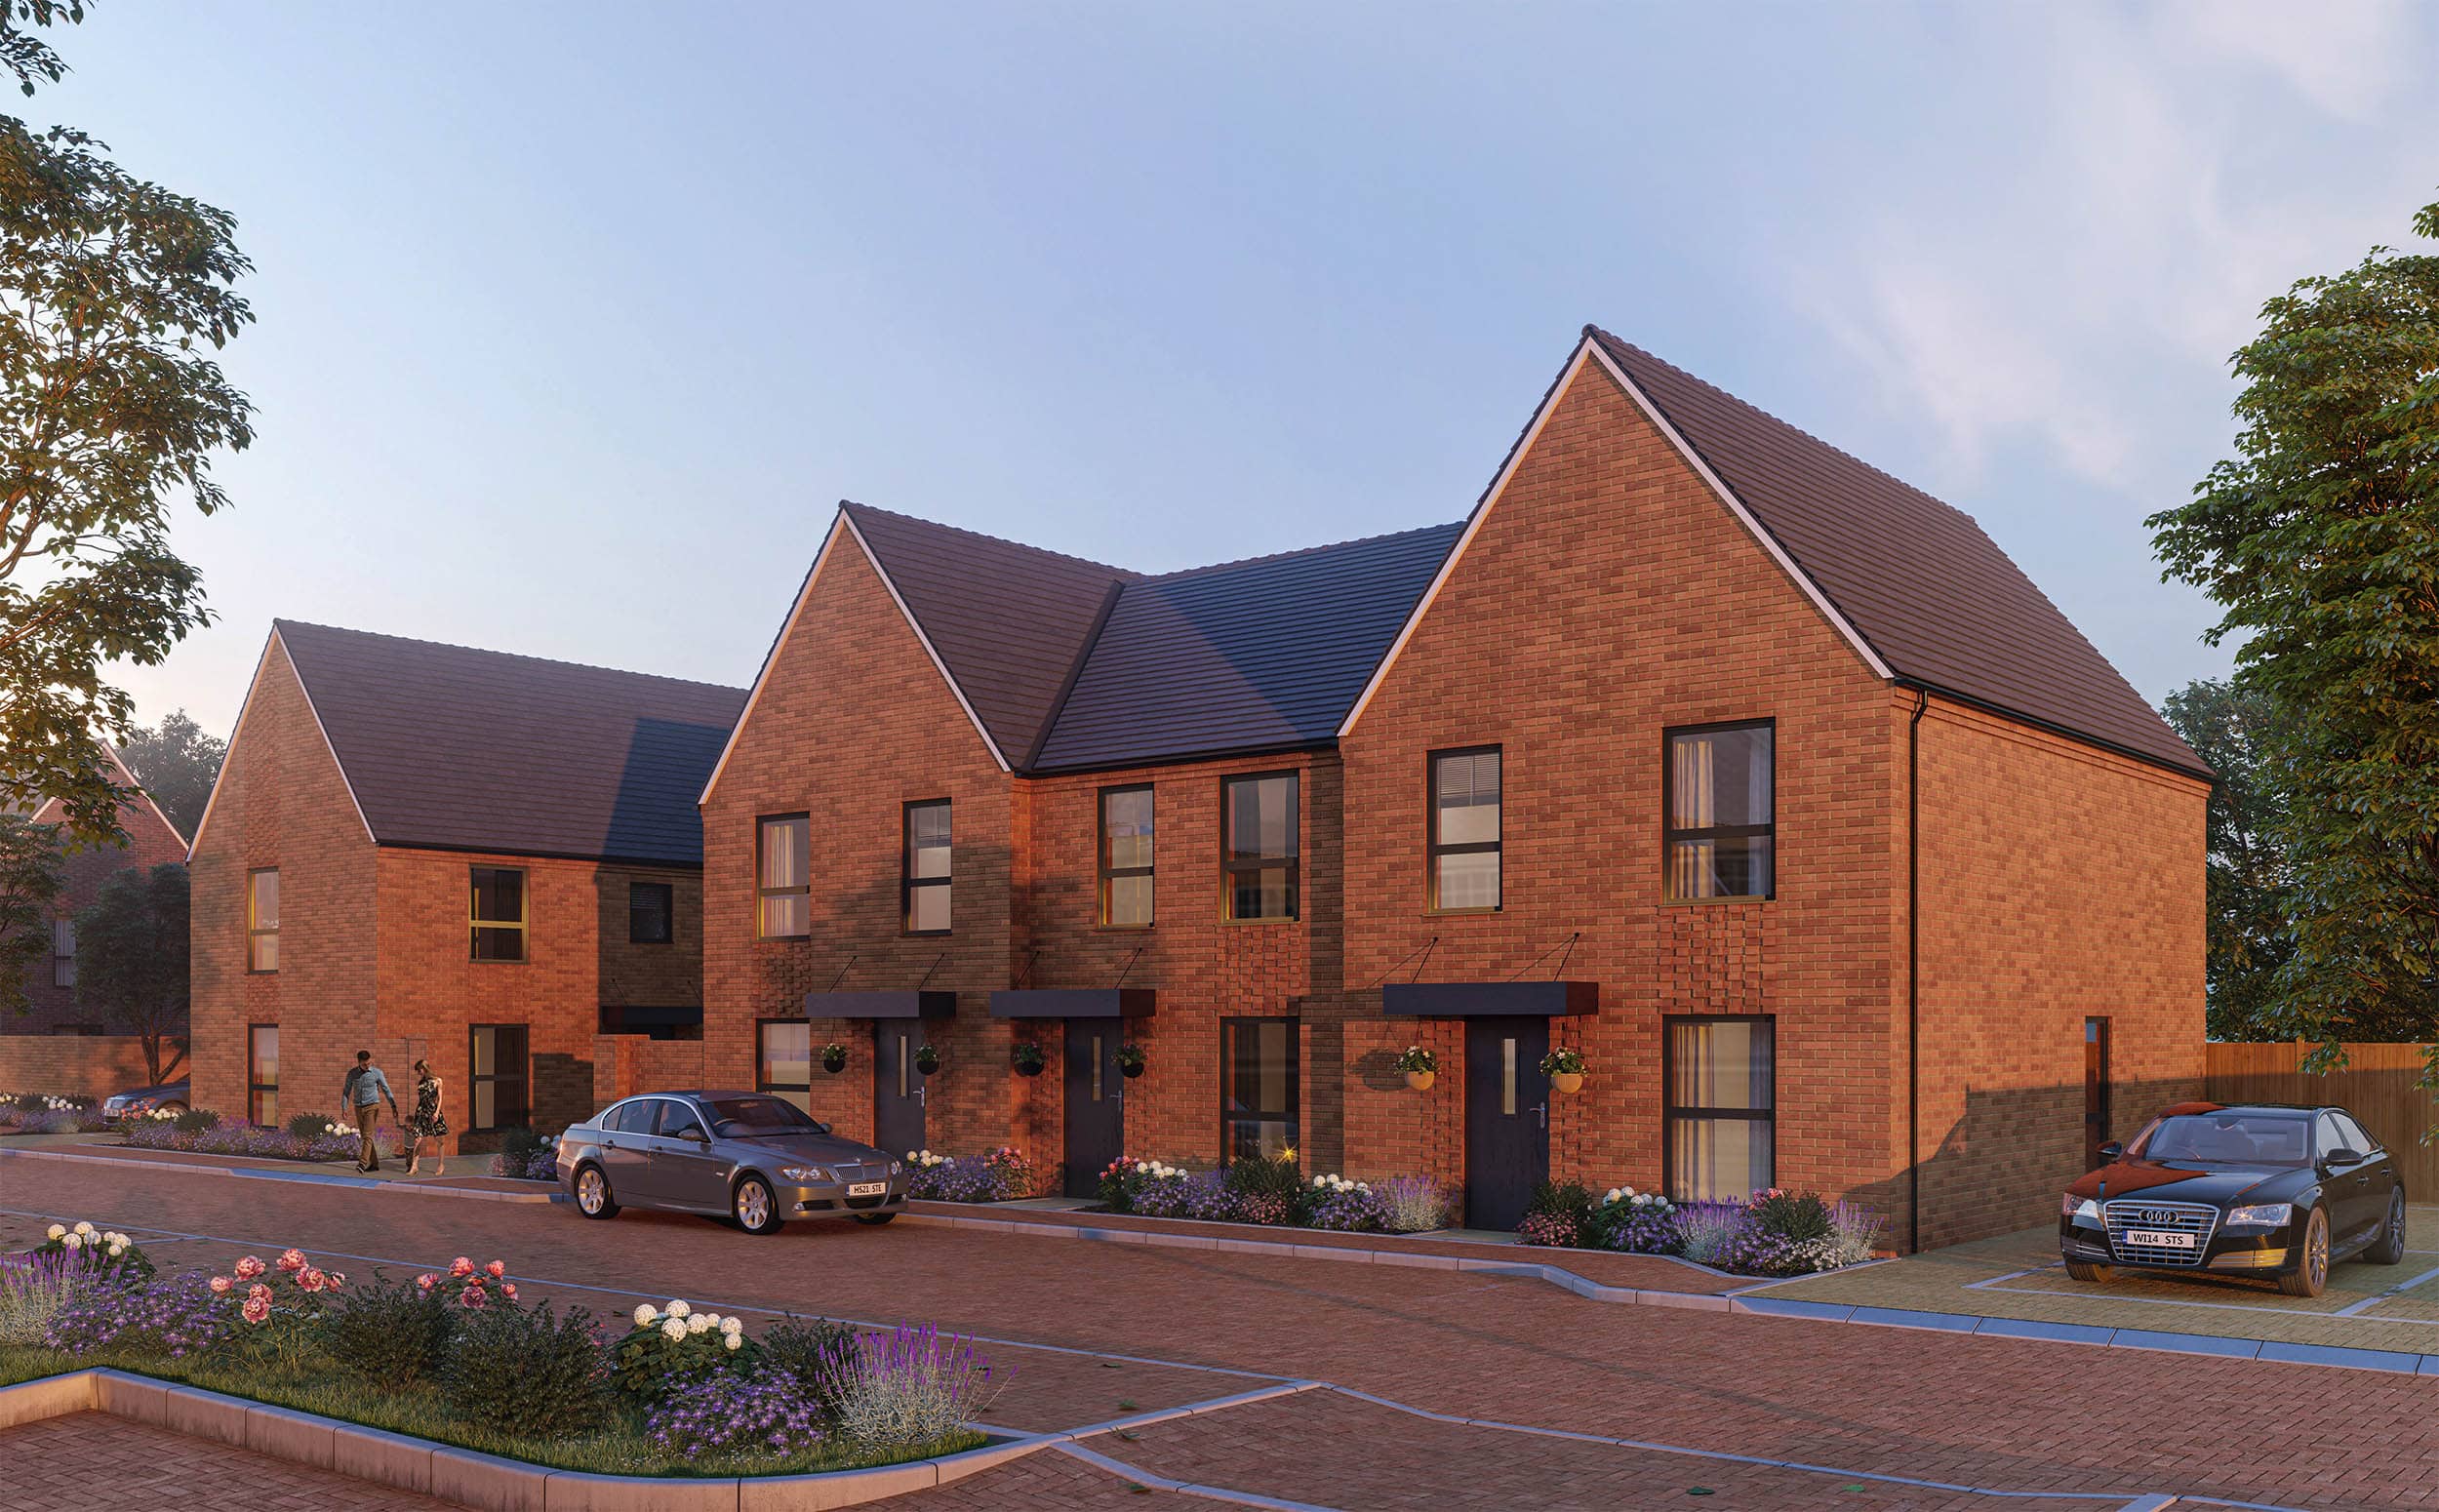 External CGI of L&Q's Glebe Farm - Shared Ownership homes available on Share to Buy